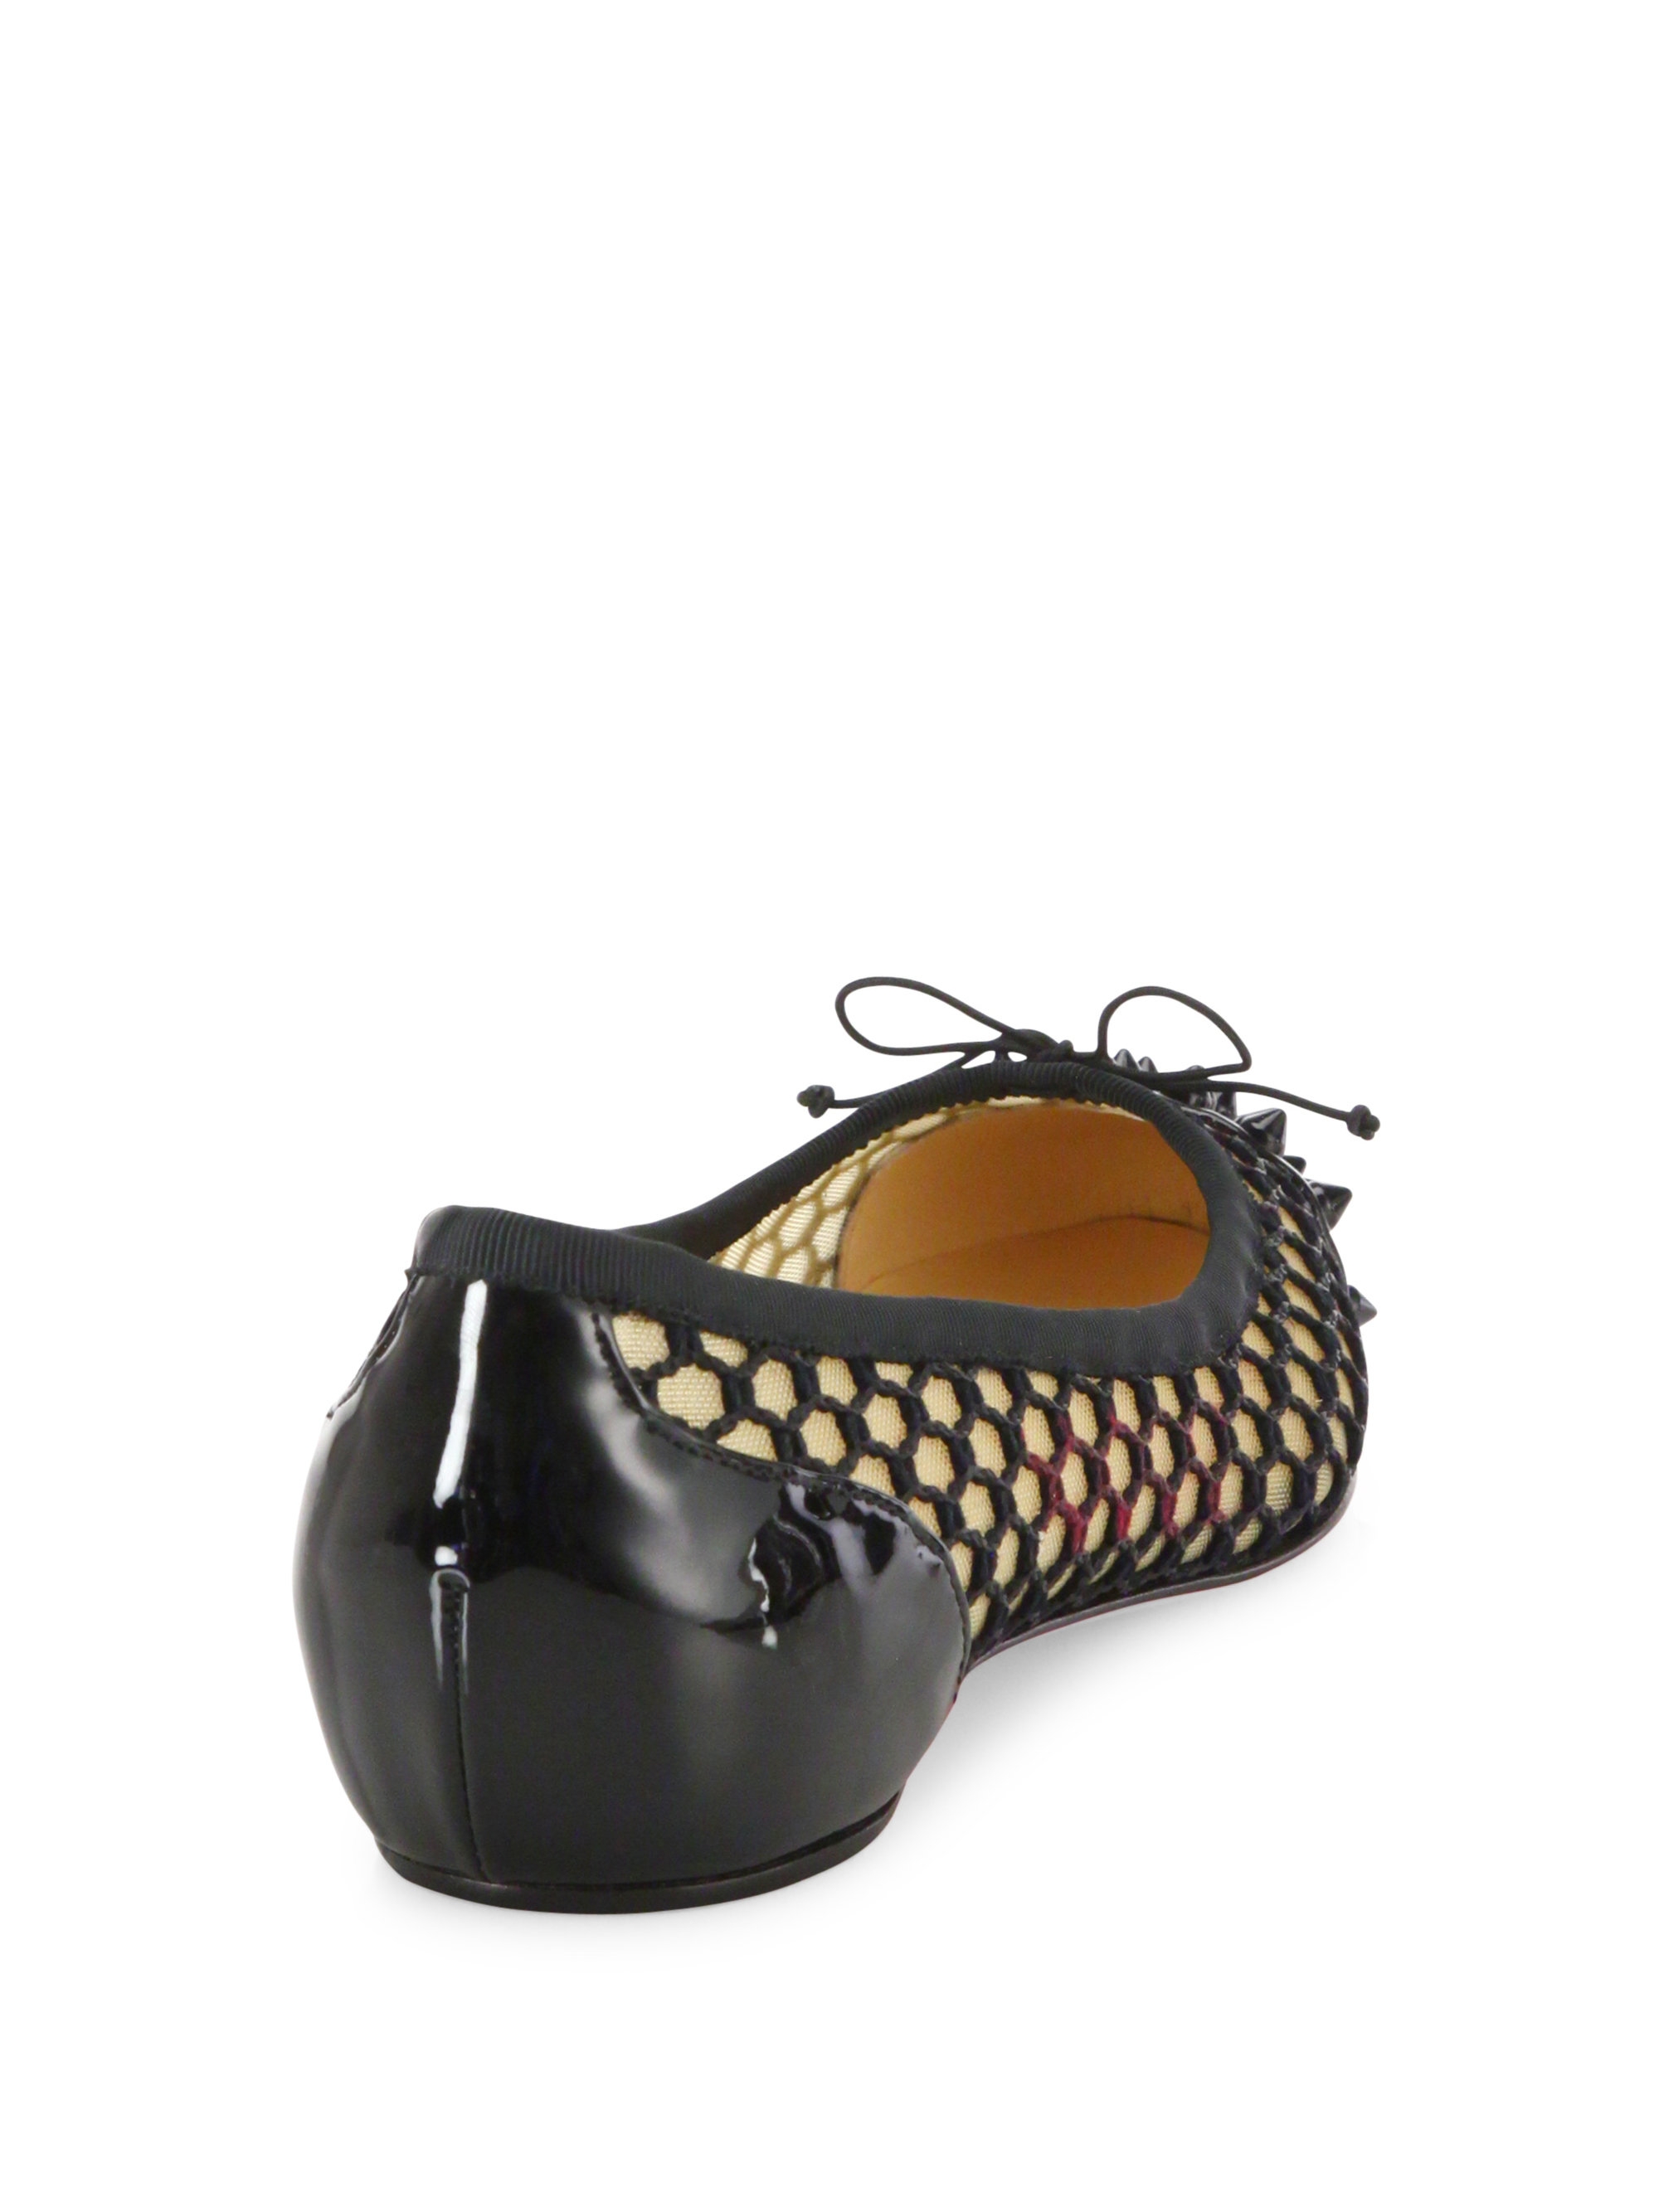 Christian louboutin Mix Patent Spiked Knotted Mesh Flats in Black ...